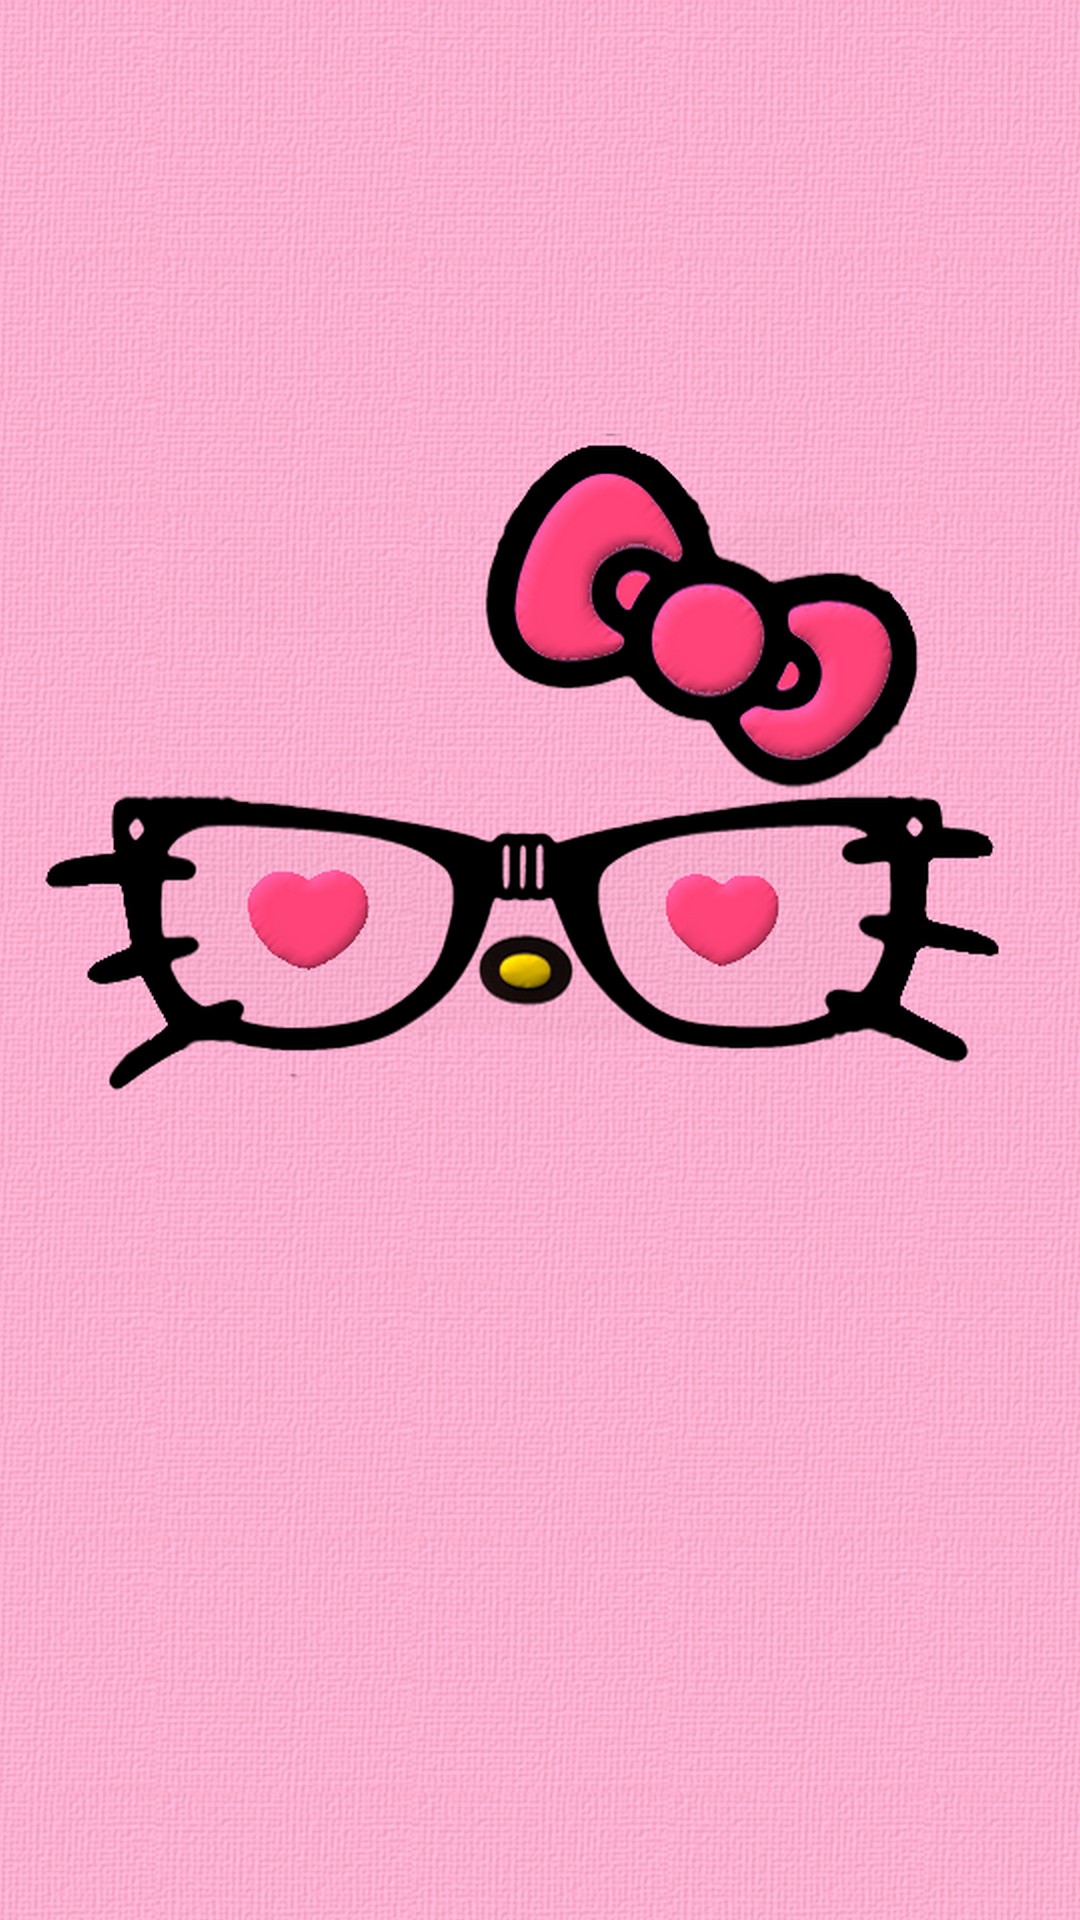 Sanrio Hello Kitty iPhone 7 Wallpaper with resolution 1080X1920 pixel. You can use this wallpaper as background for your desktop Computer Screensavers, Android or iPhone smartphones